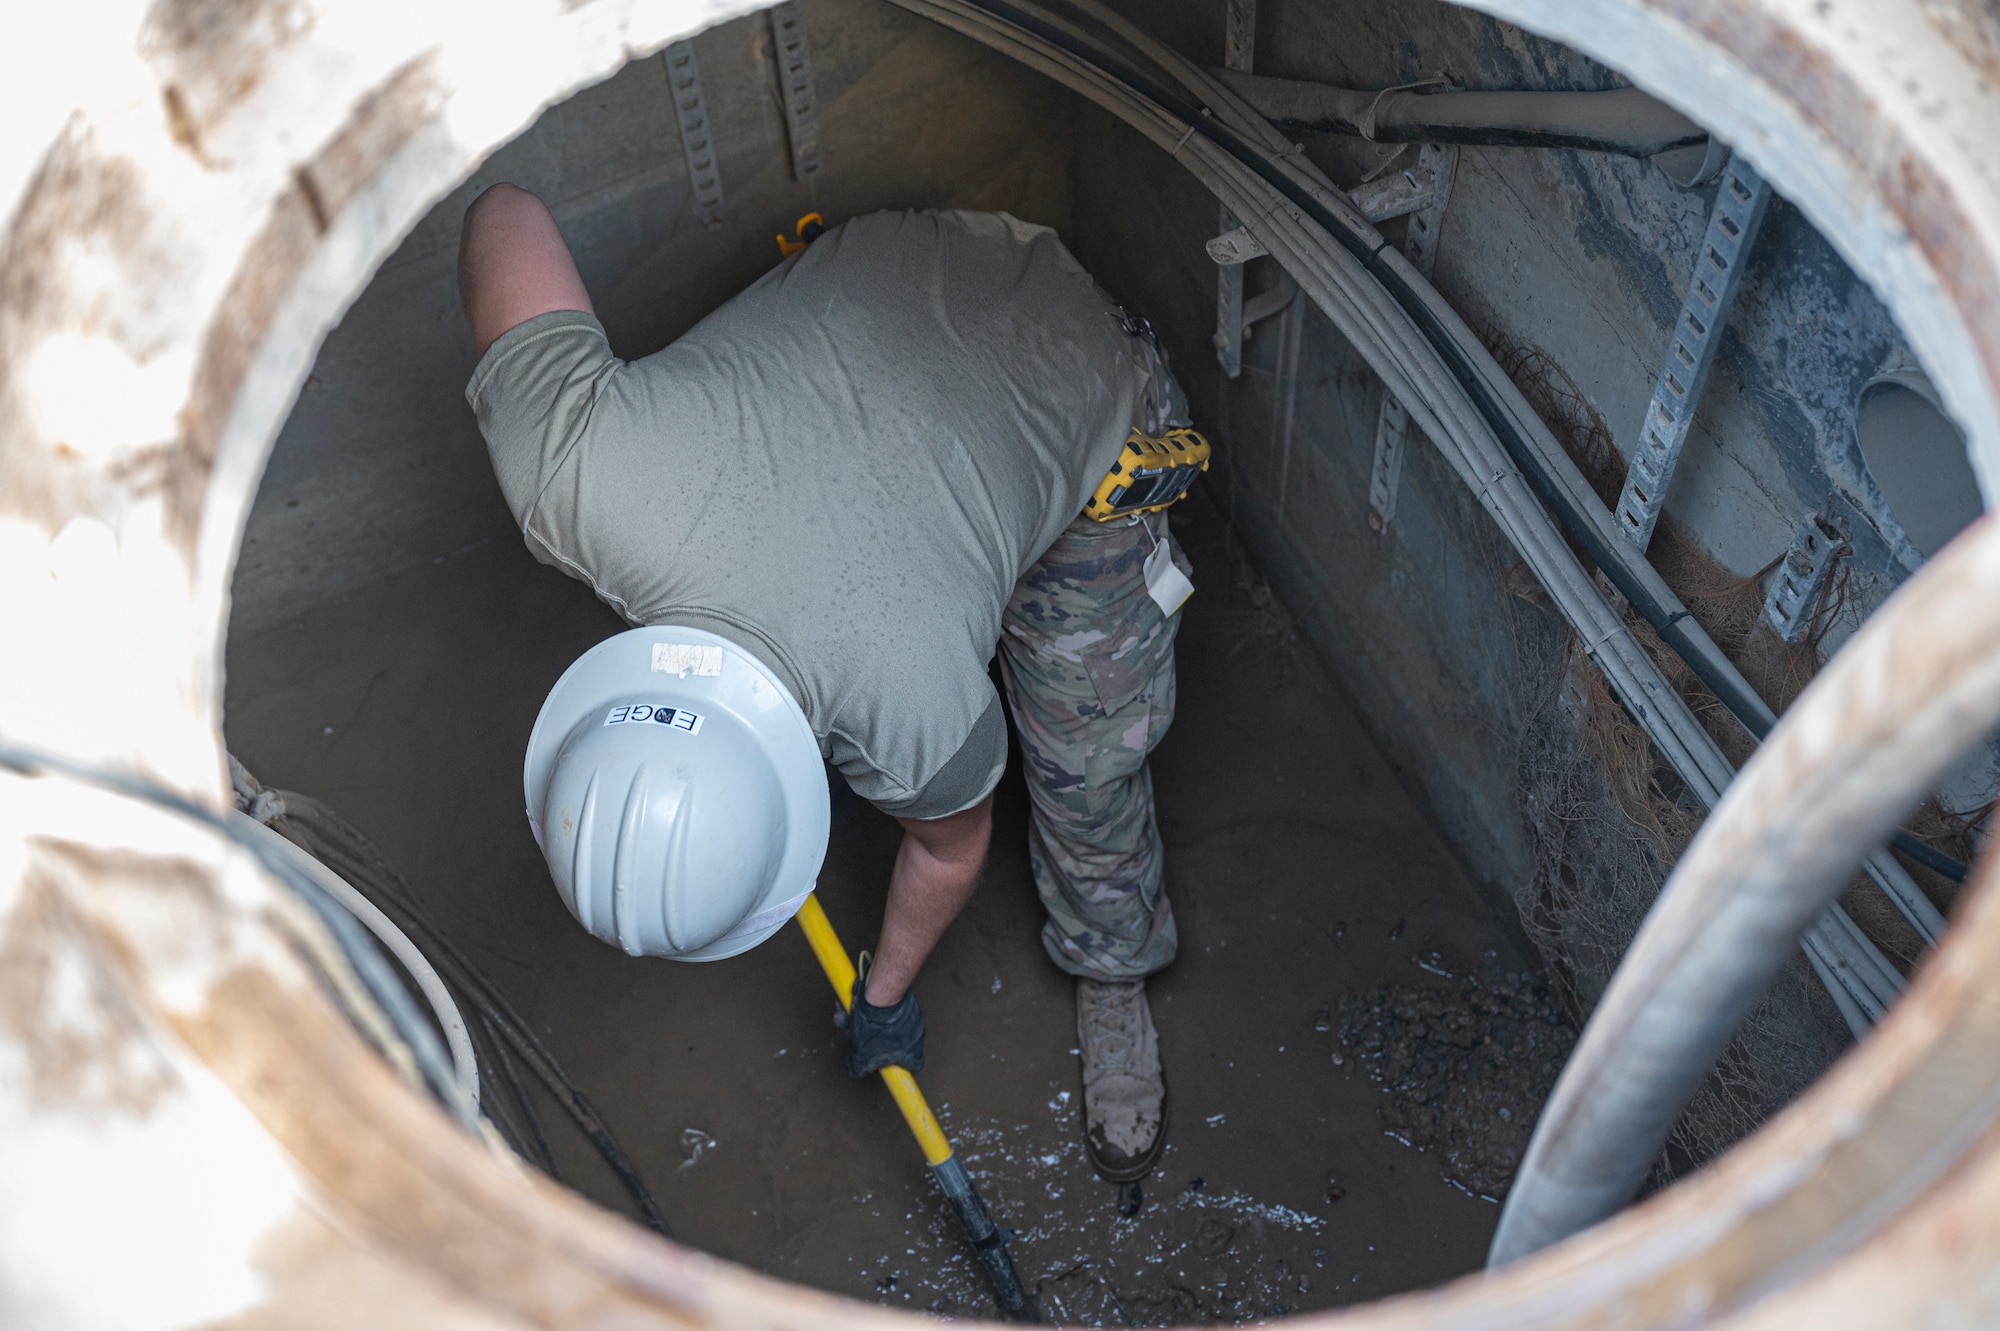 A member of the U.S. Air Forces Central, Air Force Forces A67 Engineering and Installation team clears out a communications maintenance hole at Ali Al Salem Air Base, Kuwait, on Oct. 19, 2021.